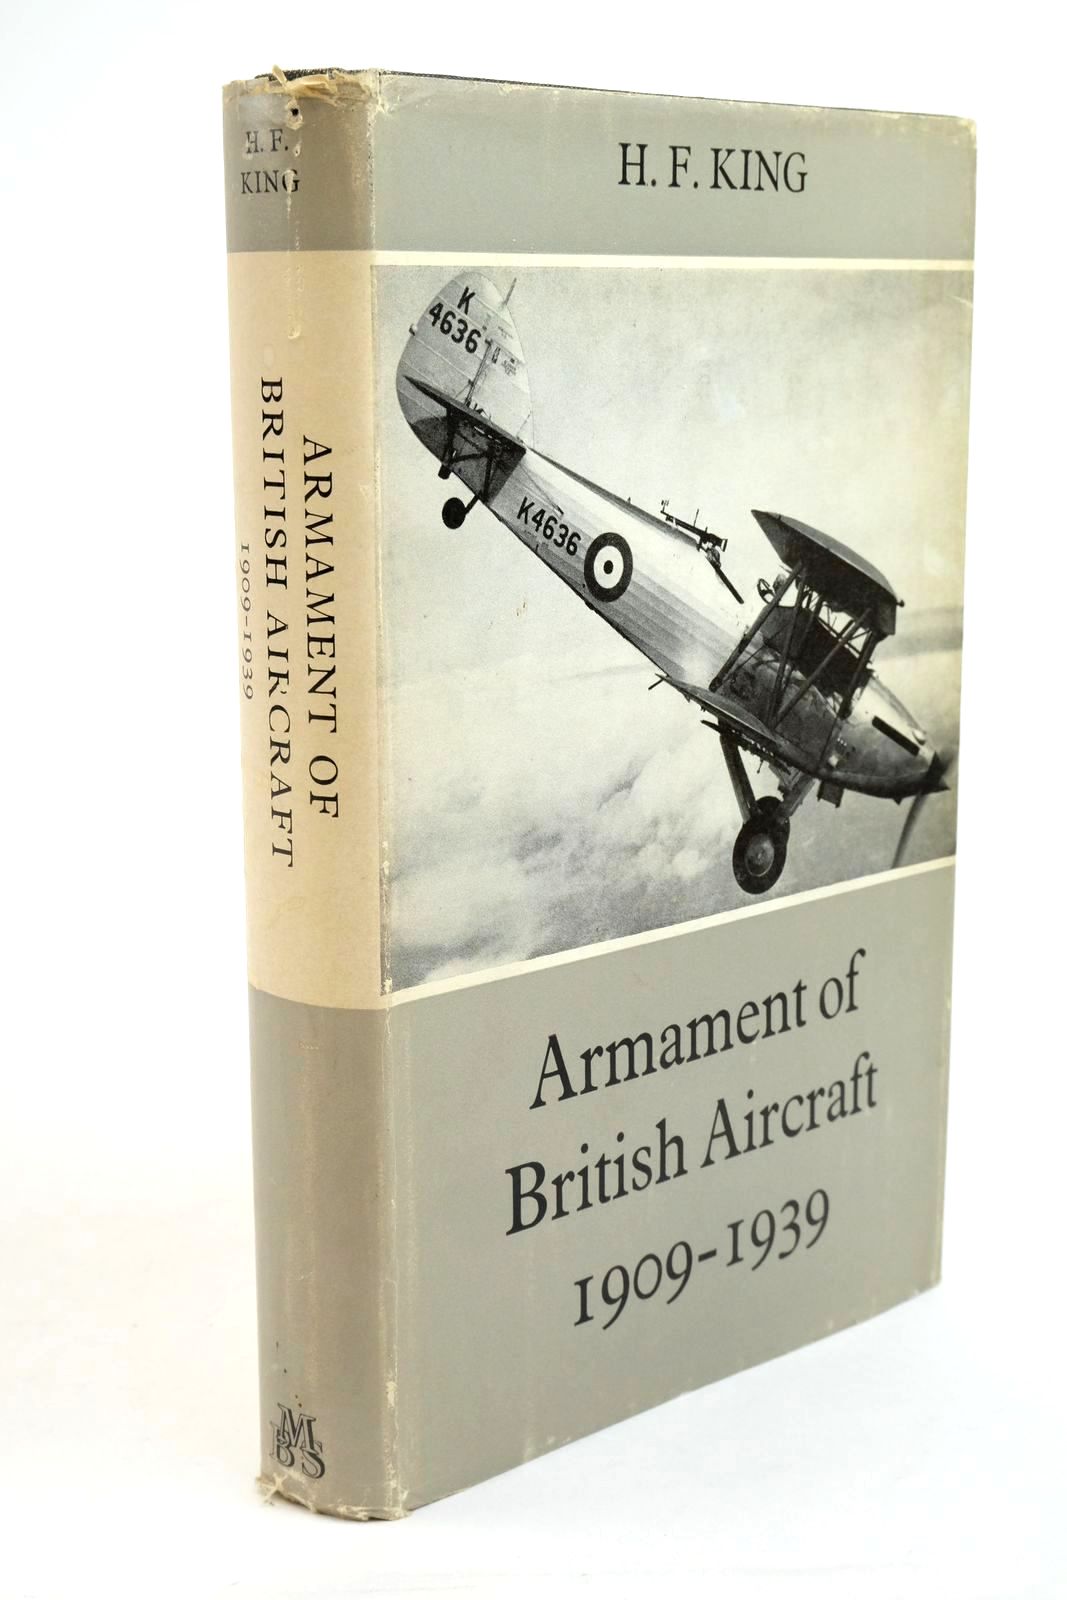 Photo of ARMAMENT OF BRITISH AIRCRAFT 1909-1939 written by King, H.F. published by Military Book Society (STOCK CODE: 1322023)  for sale by Stella & Rose's Books